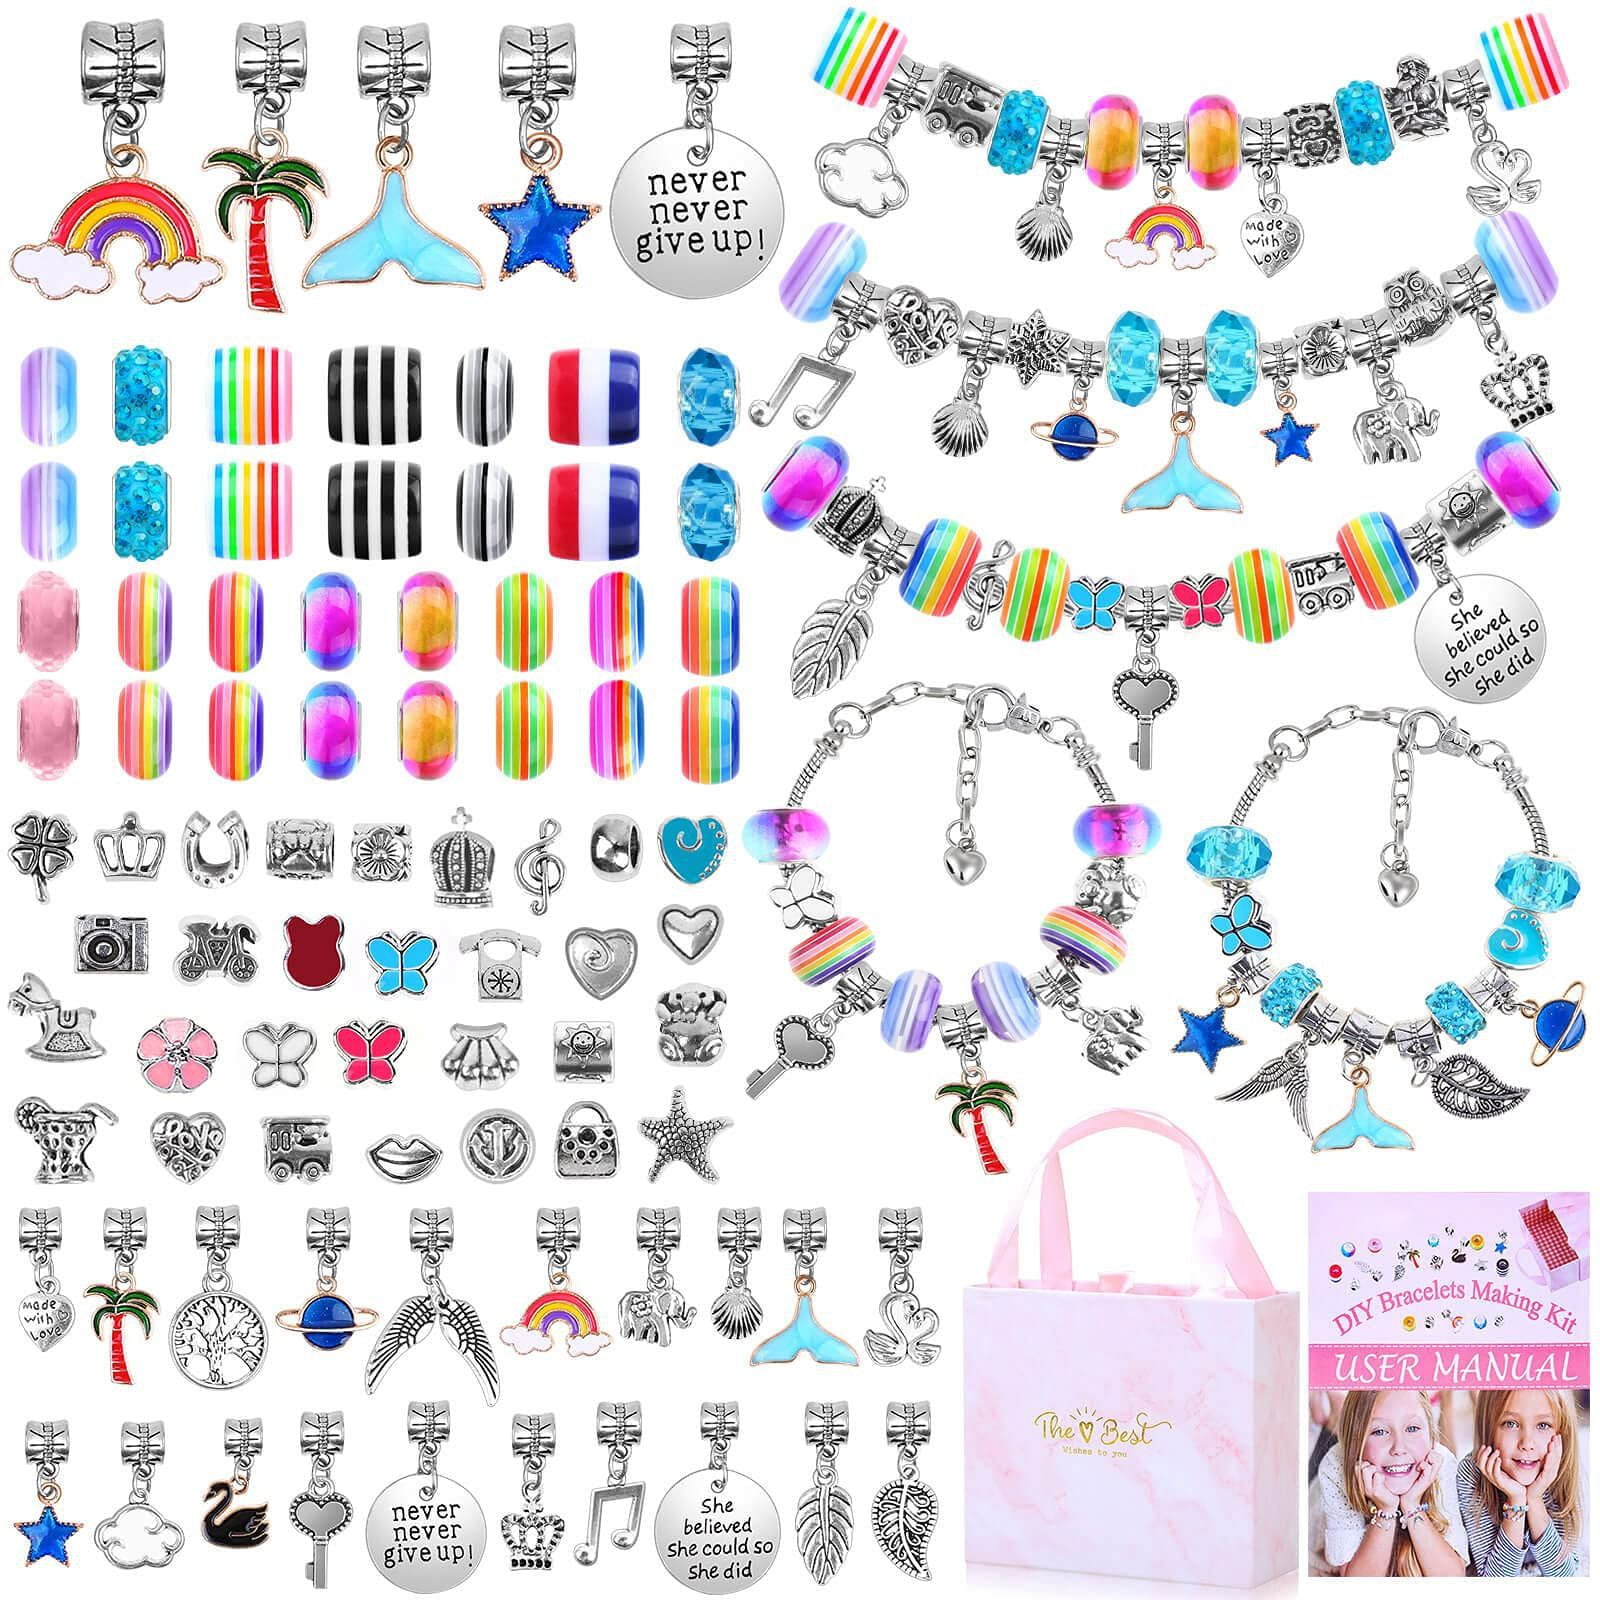 Bracelet Making Kit for Girls - 71 Pieces Jewelry Supplies Beads for  Jewelry Making Bracelets Craft Kit - Christmas Gift Idea for Teen Girls 